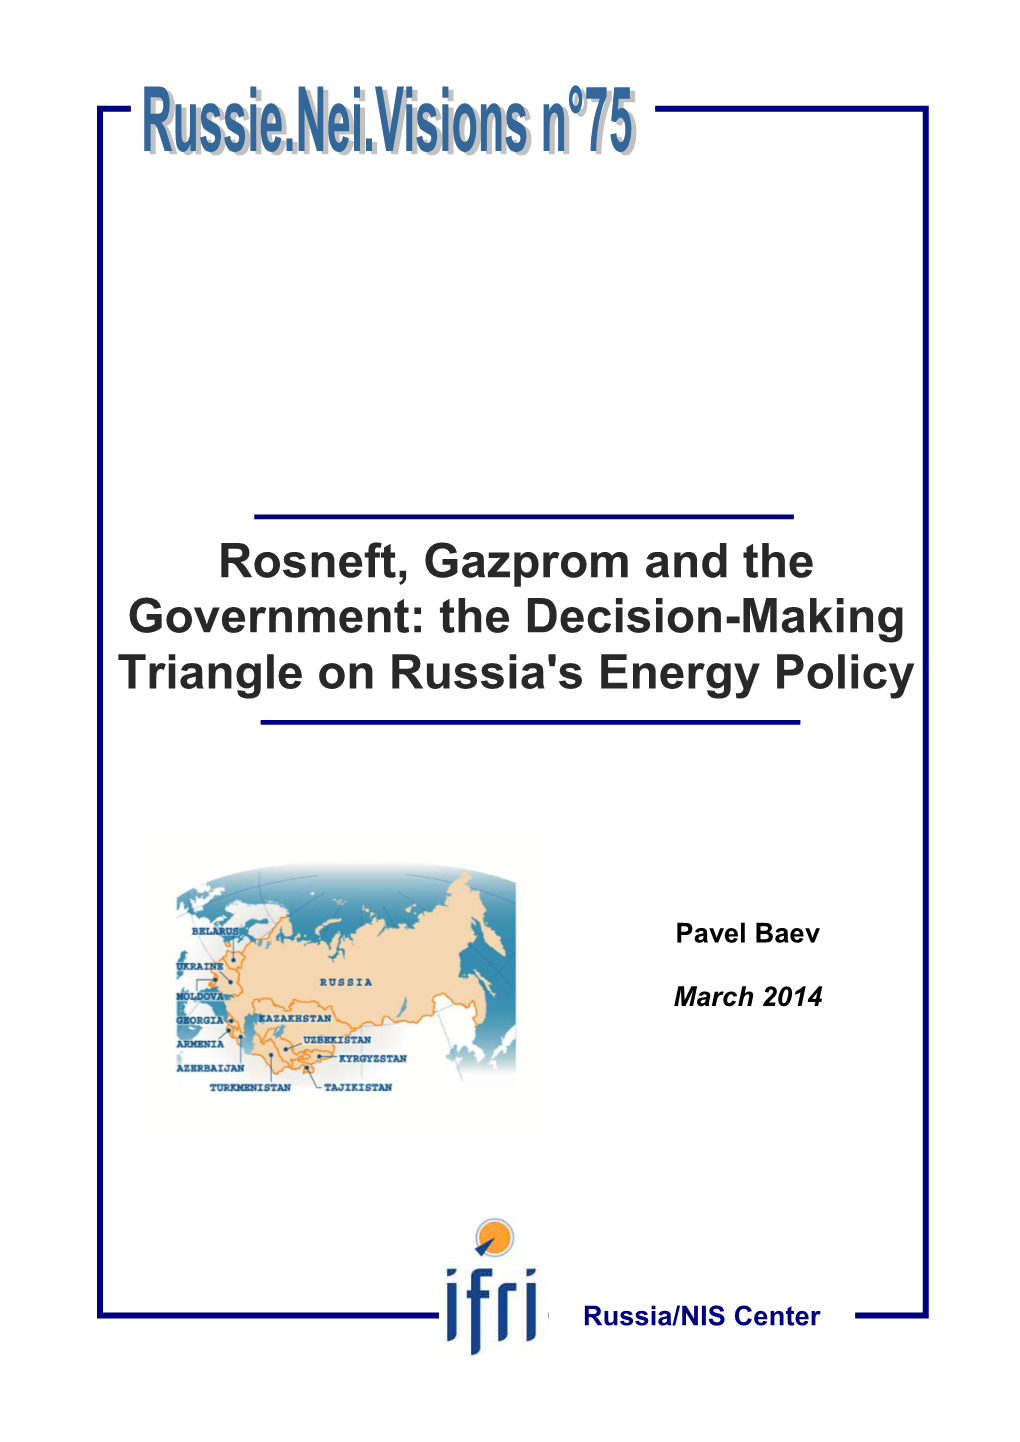 Rosneft, Gazprom and the Government: the Decision-Making Triangle on Russia's Energy Policy